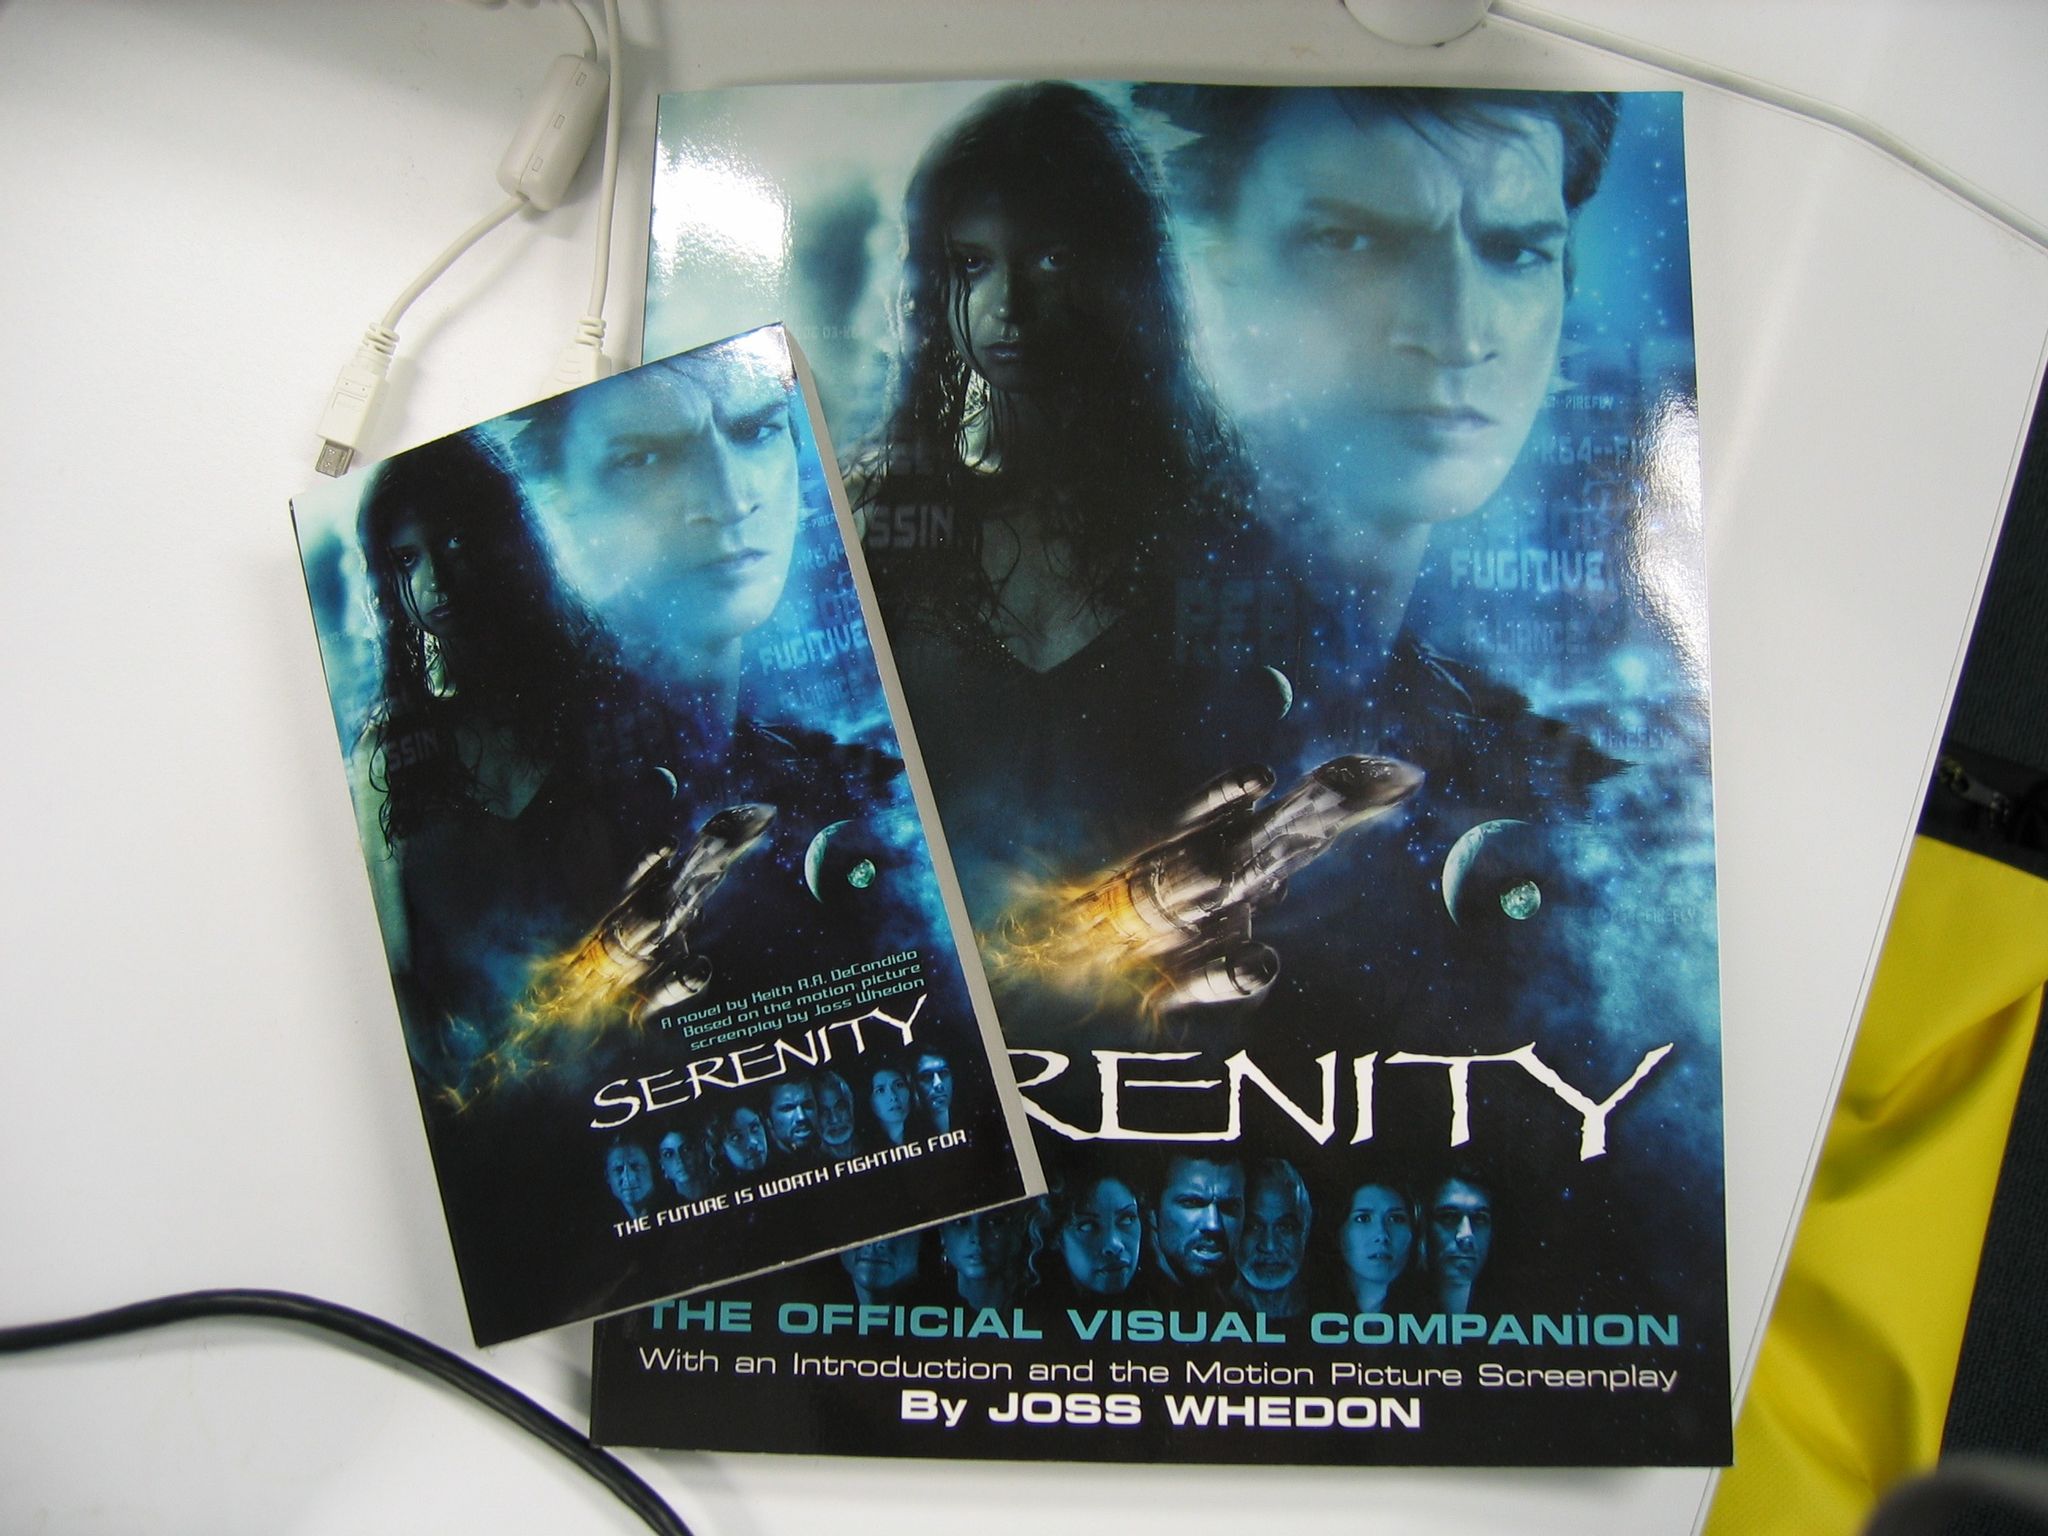 A photo of the novelisation of the movie "Serenity", along with the "Official Serenity Visual Companion" book.